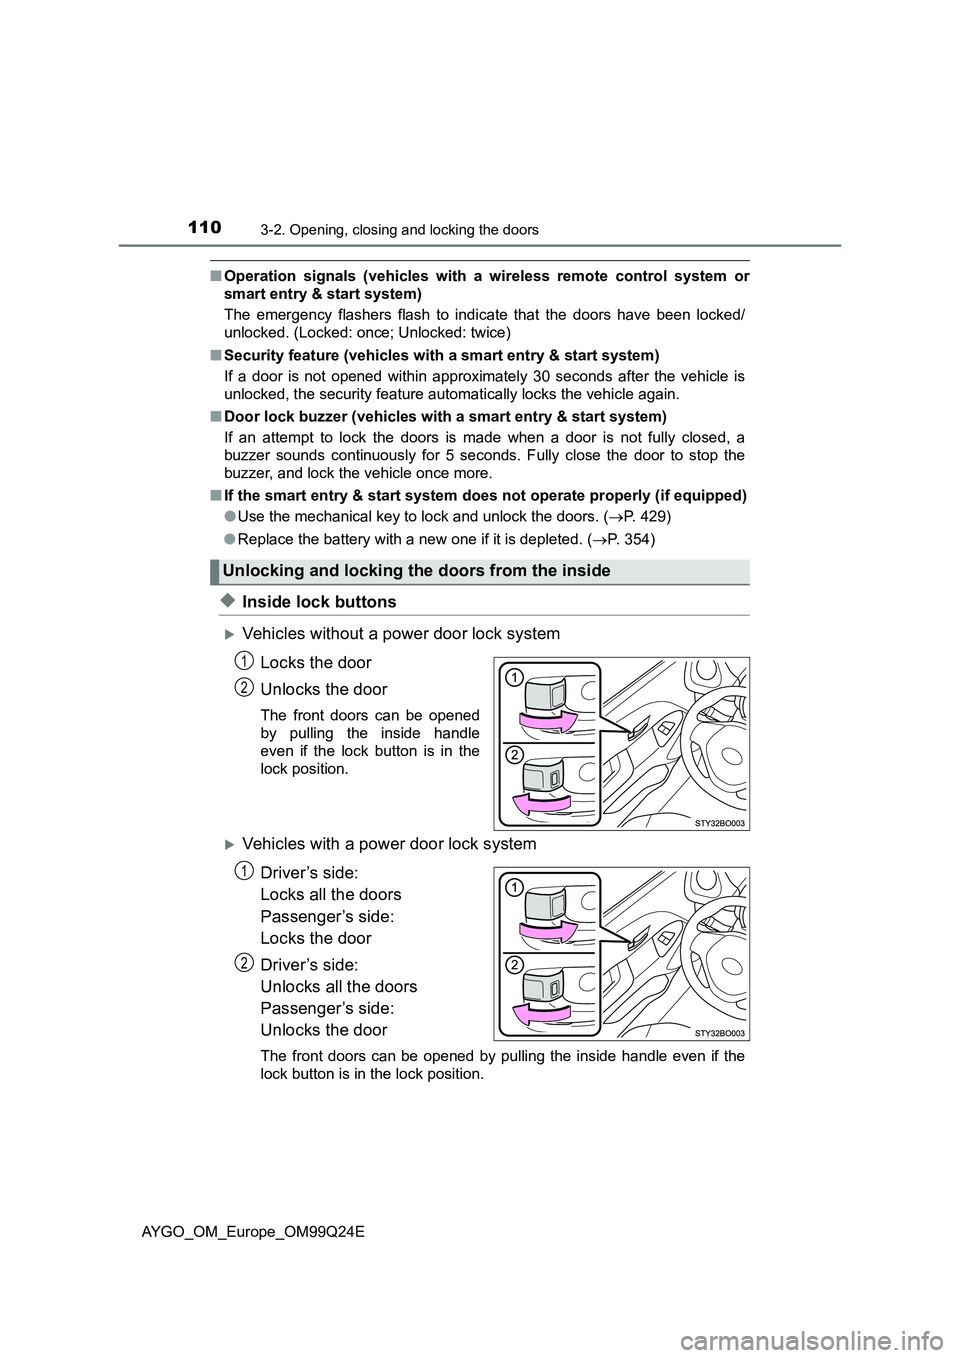 TOYOTA AYGO 2017  Owners Manual (in English) 1103-2. Opening, closing and locking the doors
AYGO_OM_Europe_OM99Q24E
■Operation signals (vehicles with a wireless remote control system or 
smart entry & start system) 
The emergency flashers flas